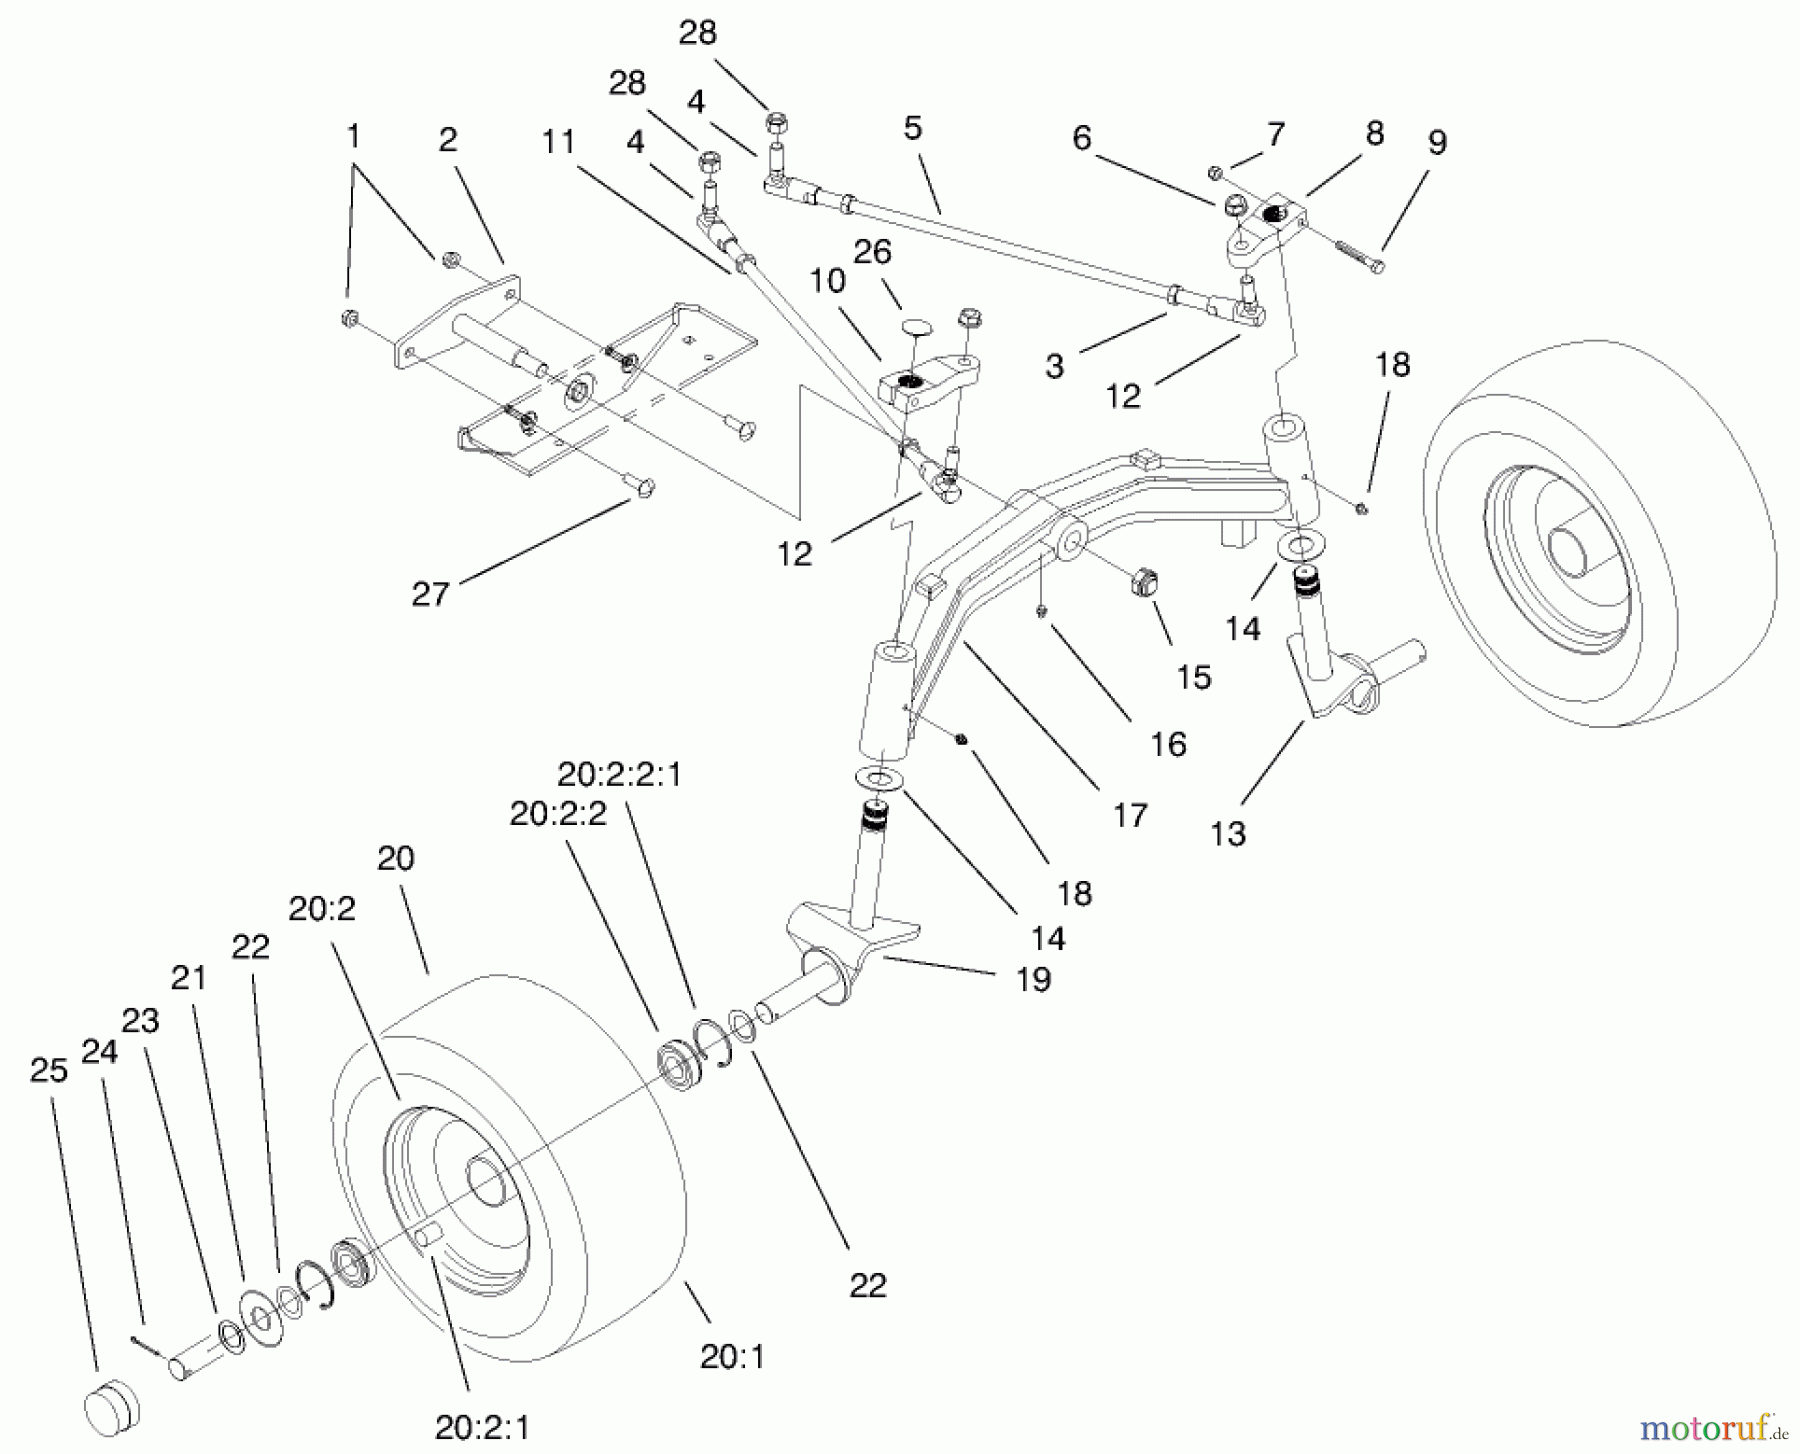  Toro Neu Mowers, Lawn & Garden Tractor Seite 1 73542 (520xi) - Toro 520xi Garden Tractor, 2000 (000000001-000999999) TIE RODS, SPINDLE, & FRONT AXLE ASSEMBLY